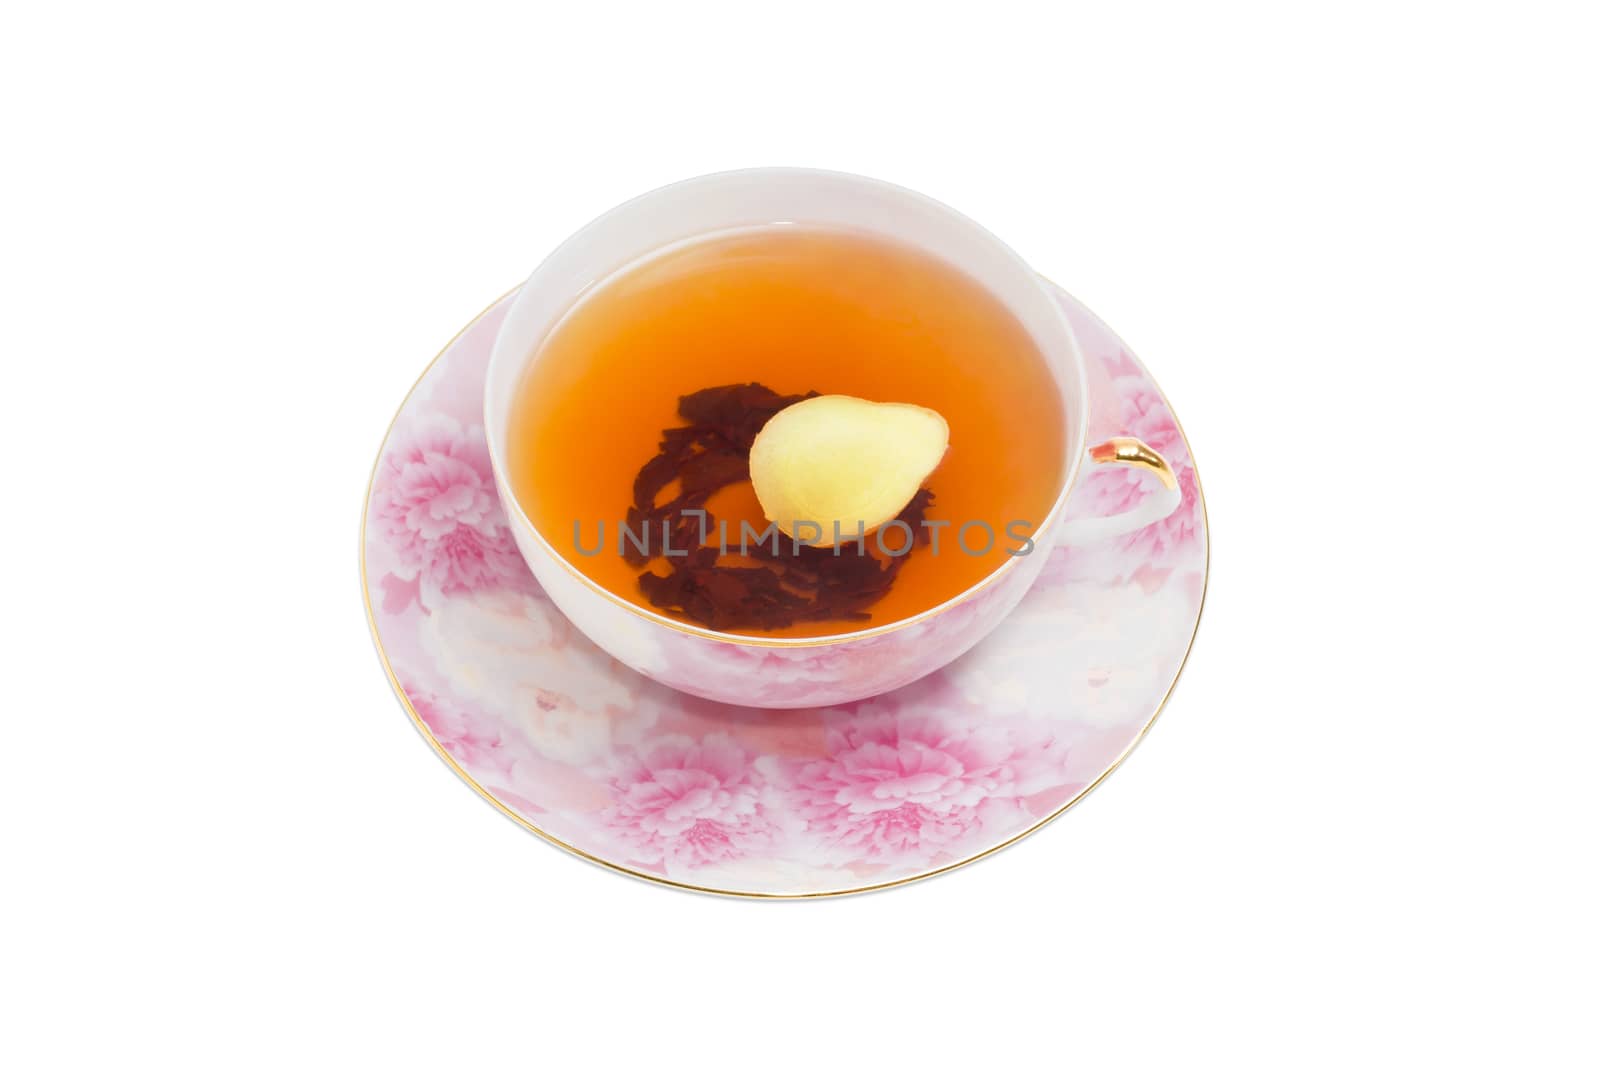 Cup of ginger tea with slice of a fresh ginger on pink saucer on a light background
